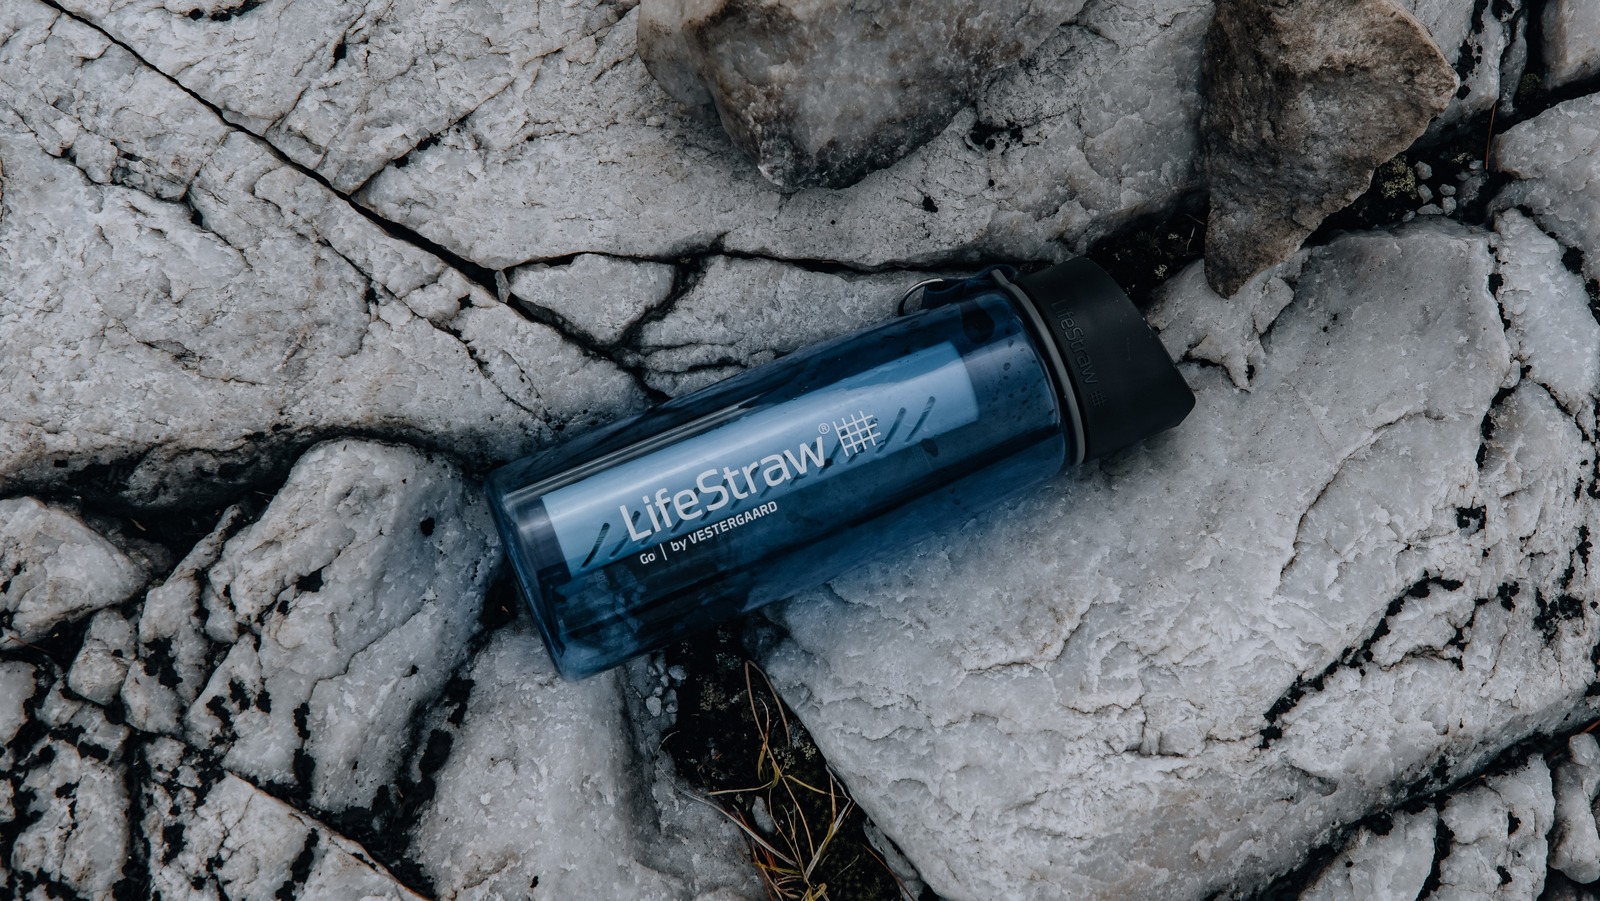 Does the life straw really works? I just got it in a sale for $10 usd :  r/CampingGear